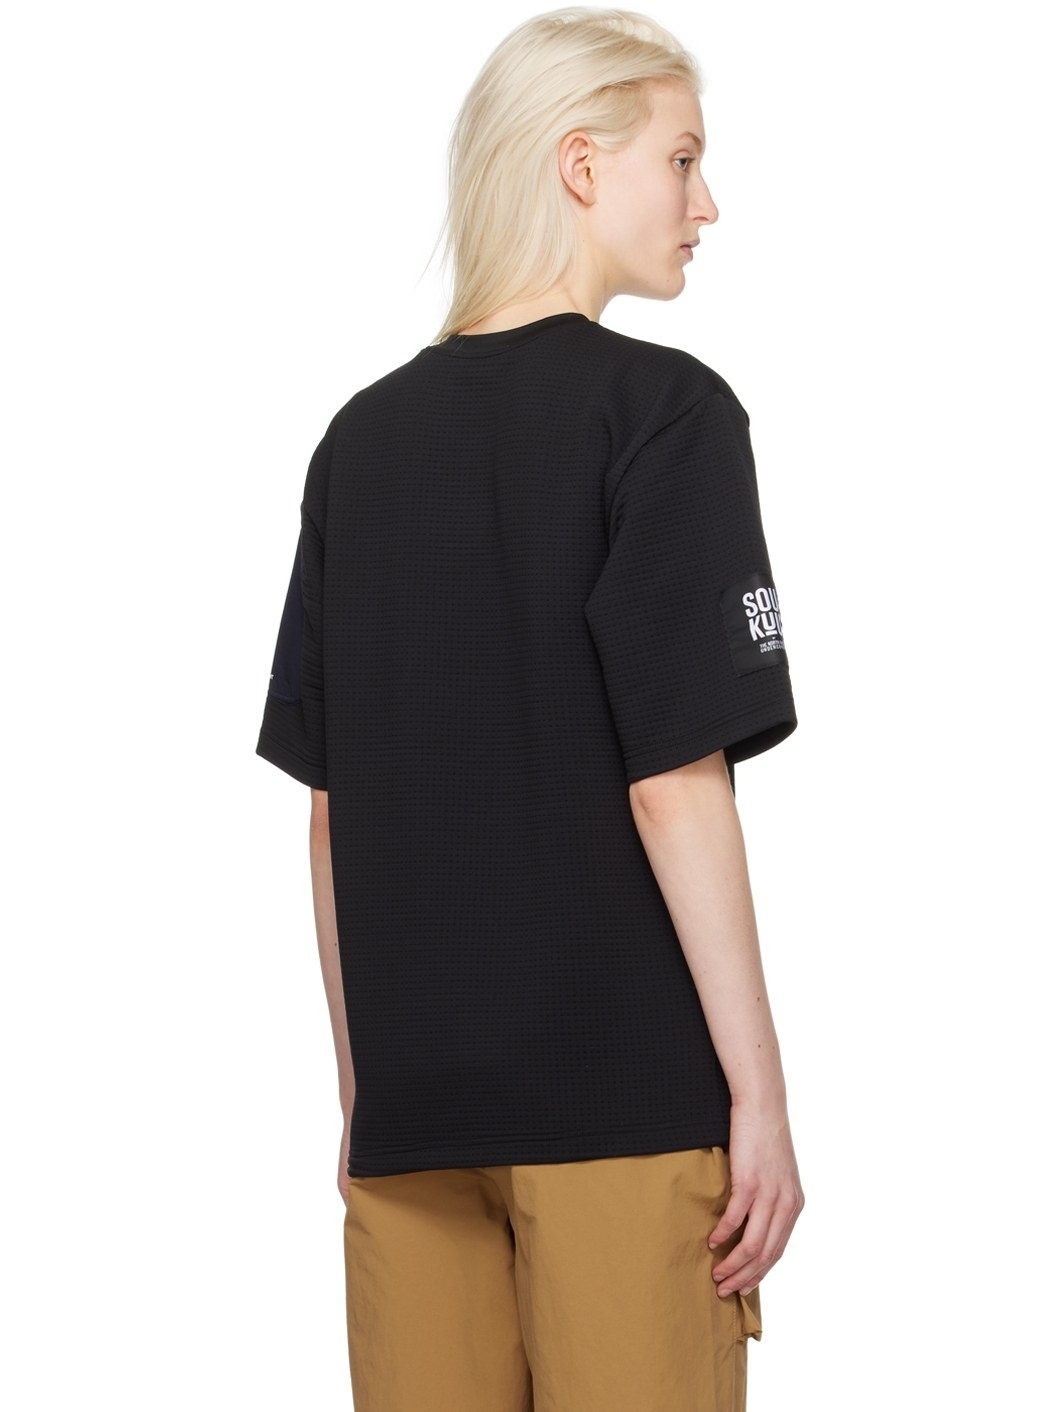 Black The North Face Edition T-Shirt - 3